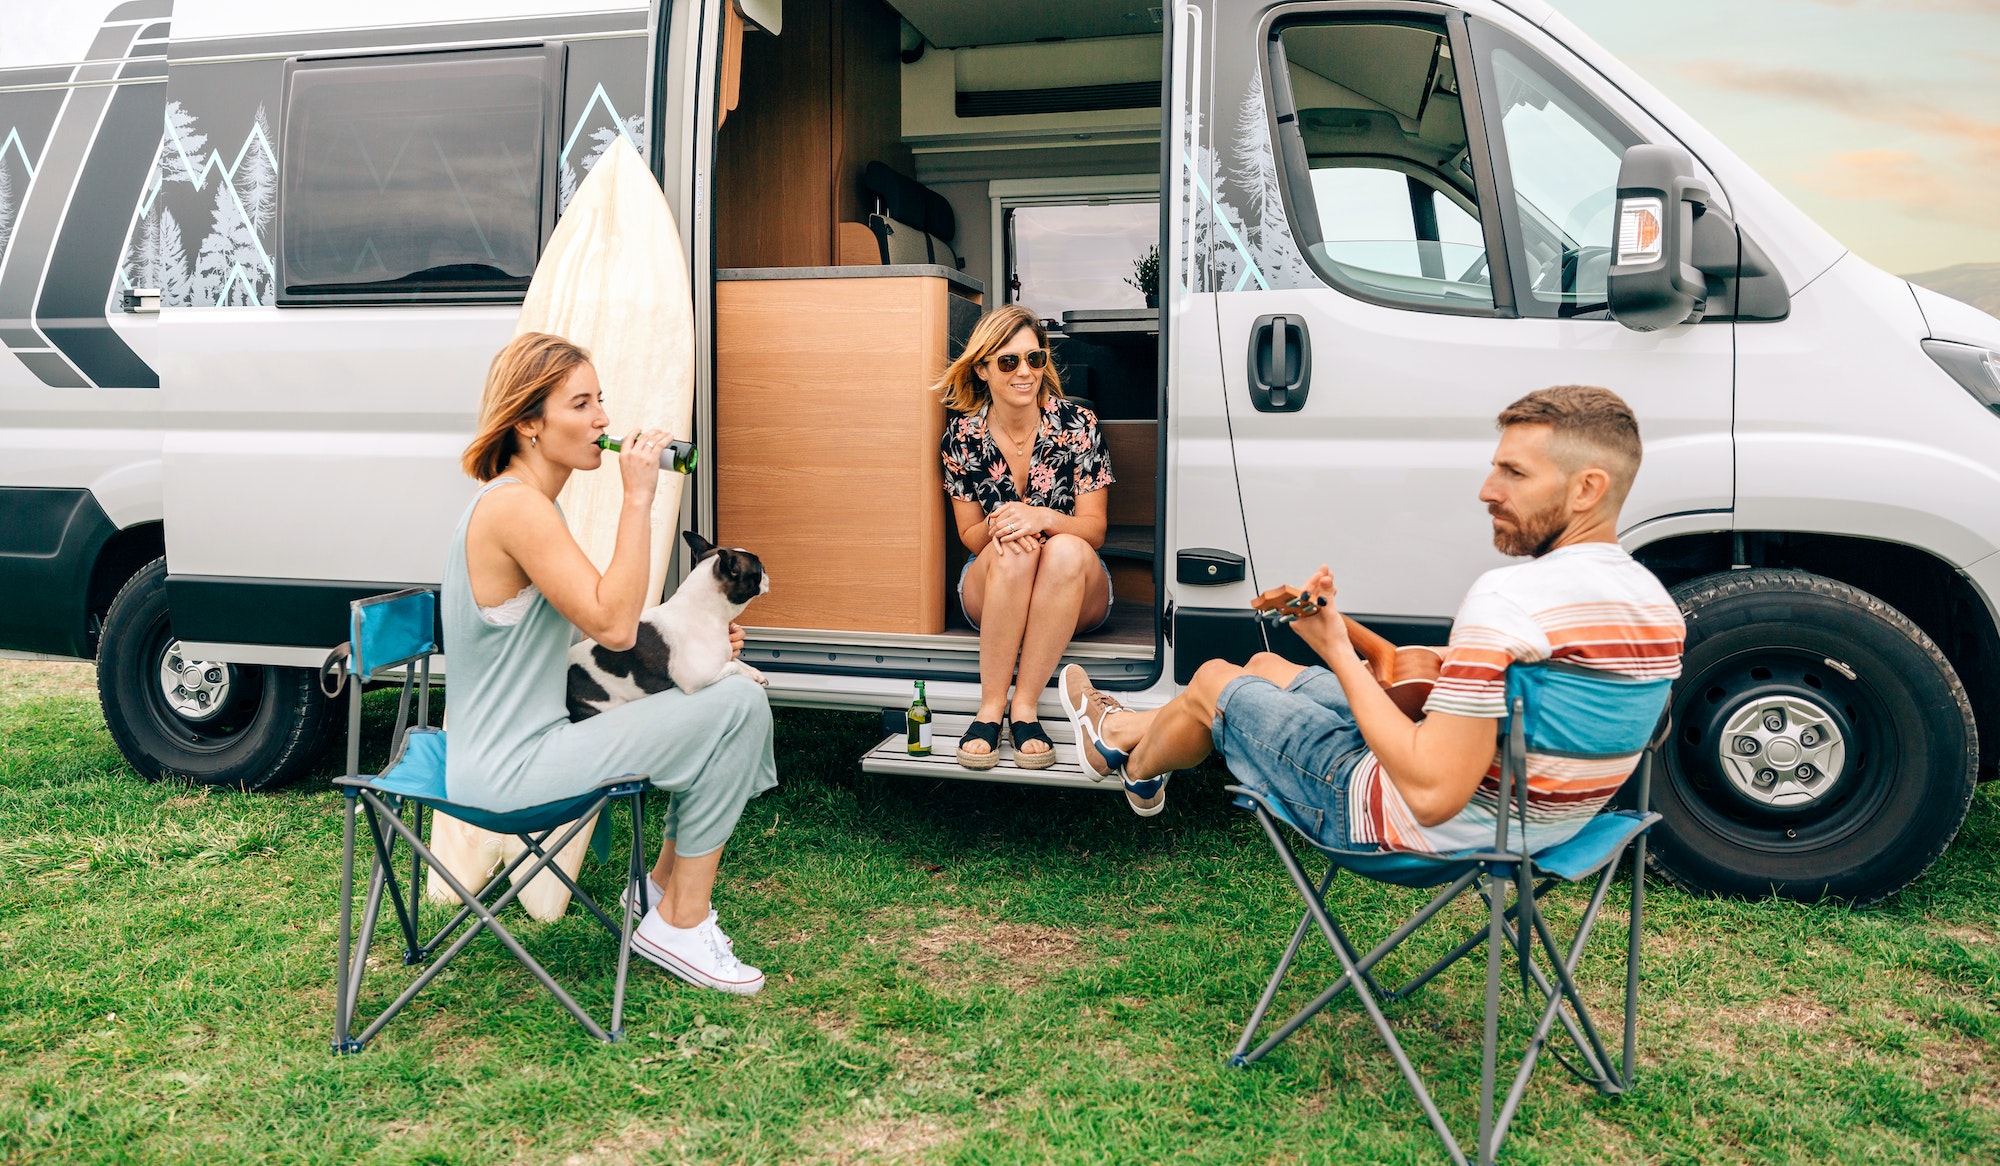 https://www.muchoneumatico.com/blog/wp-content/uploads/2022/09/friends-with-their-dog-drinking-beer-in-front-of-their-camper-van.jpg